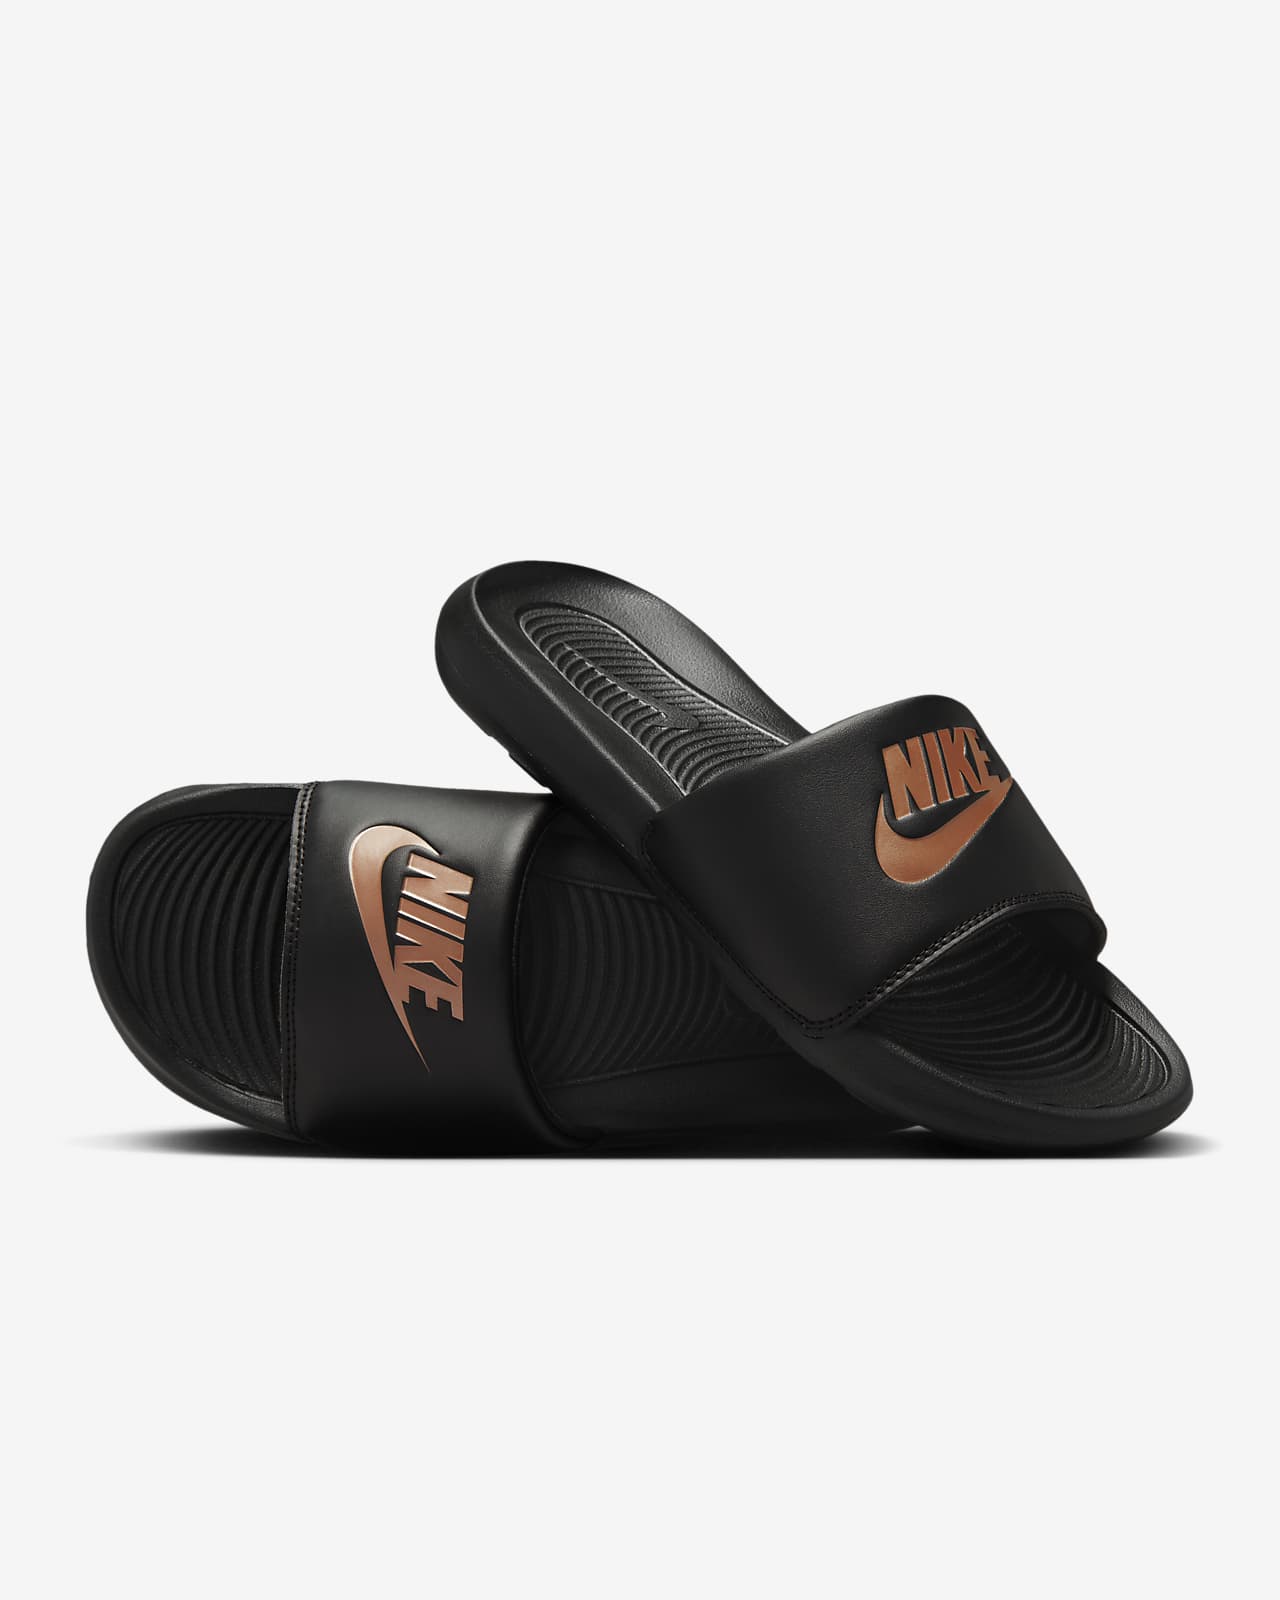 all nike sandals